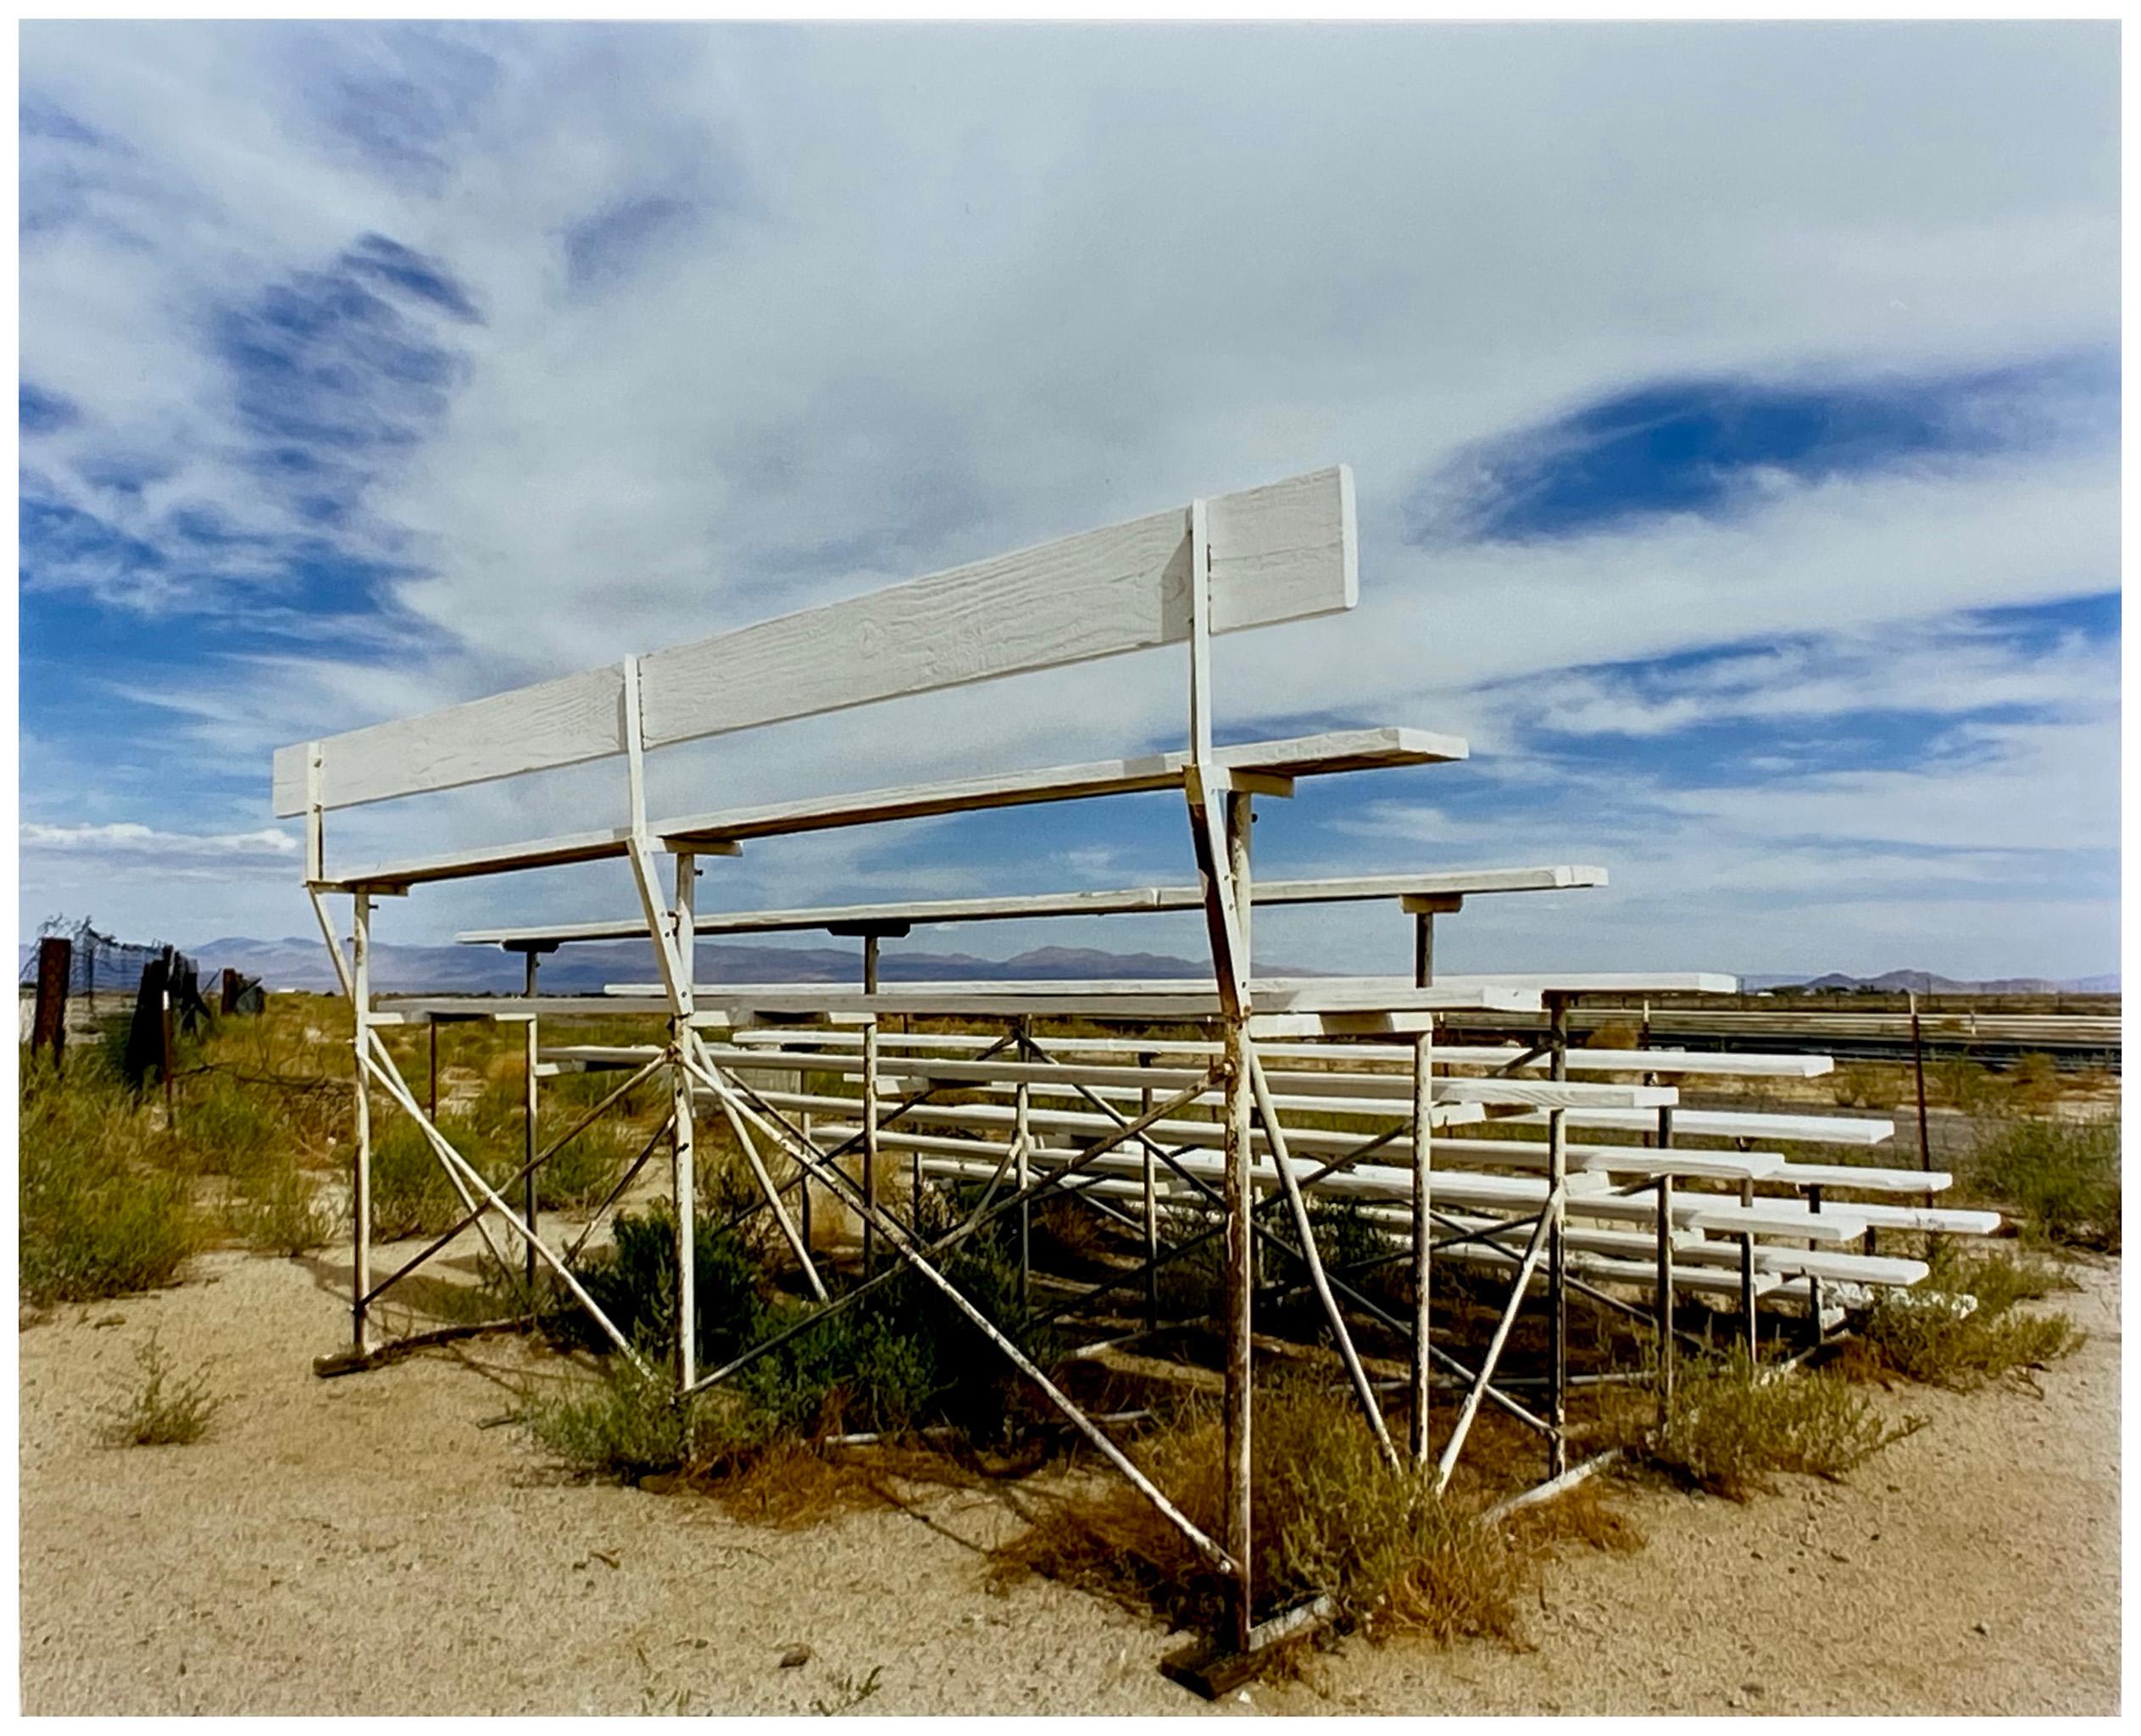 The grand stand, at the authentic modest but historic Inyokern Airport Drag Strip. As a drag racing fan Richard is pleased he got to photograph there for his 'Dream in Colour' series before it closed in 2005 after 51 years.

This artwork is a